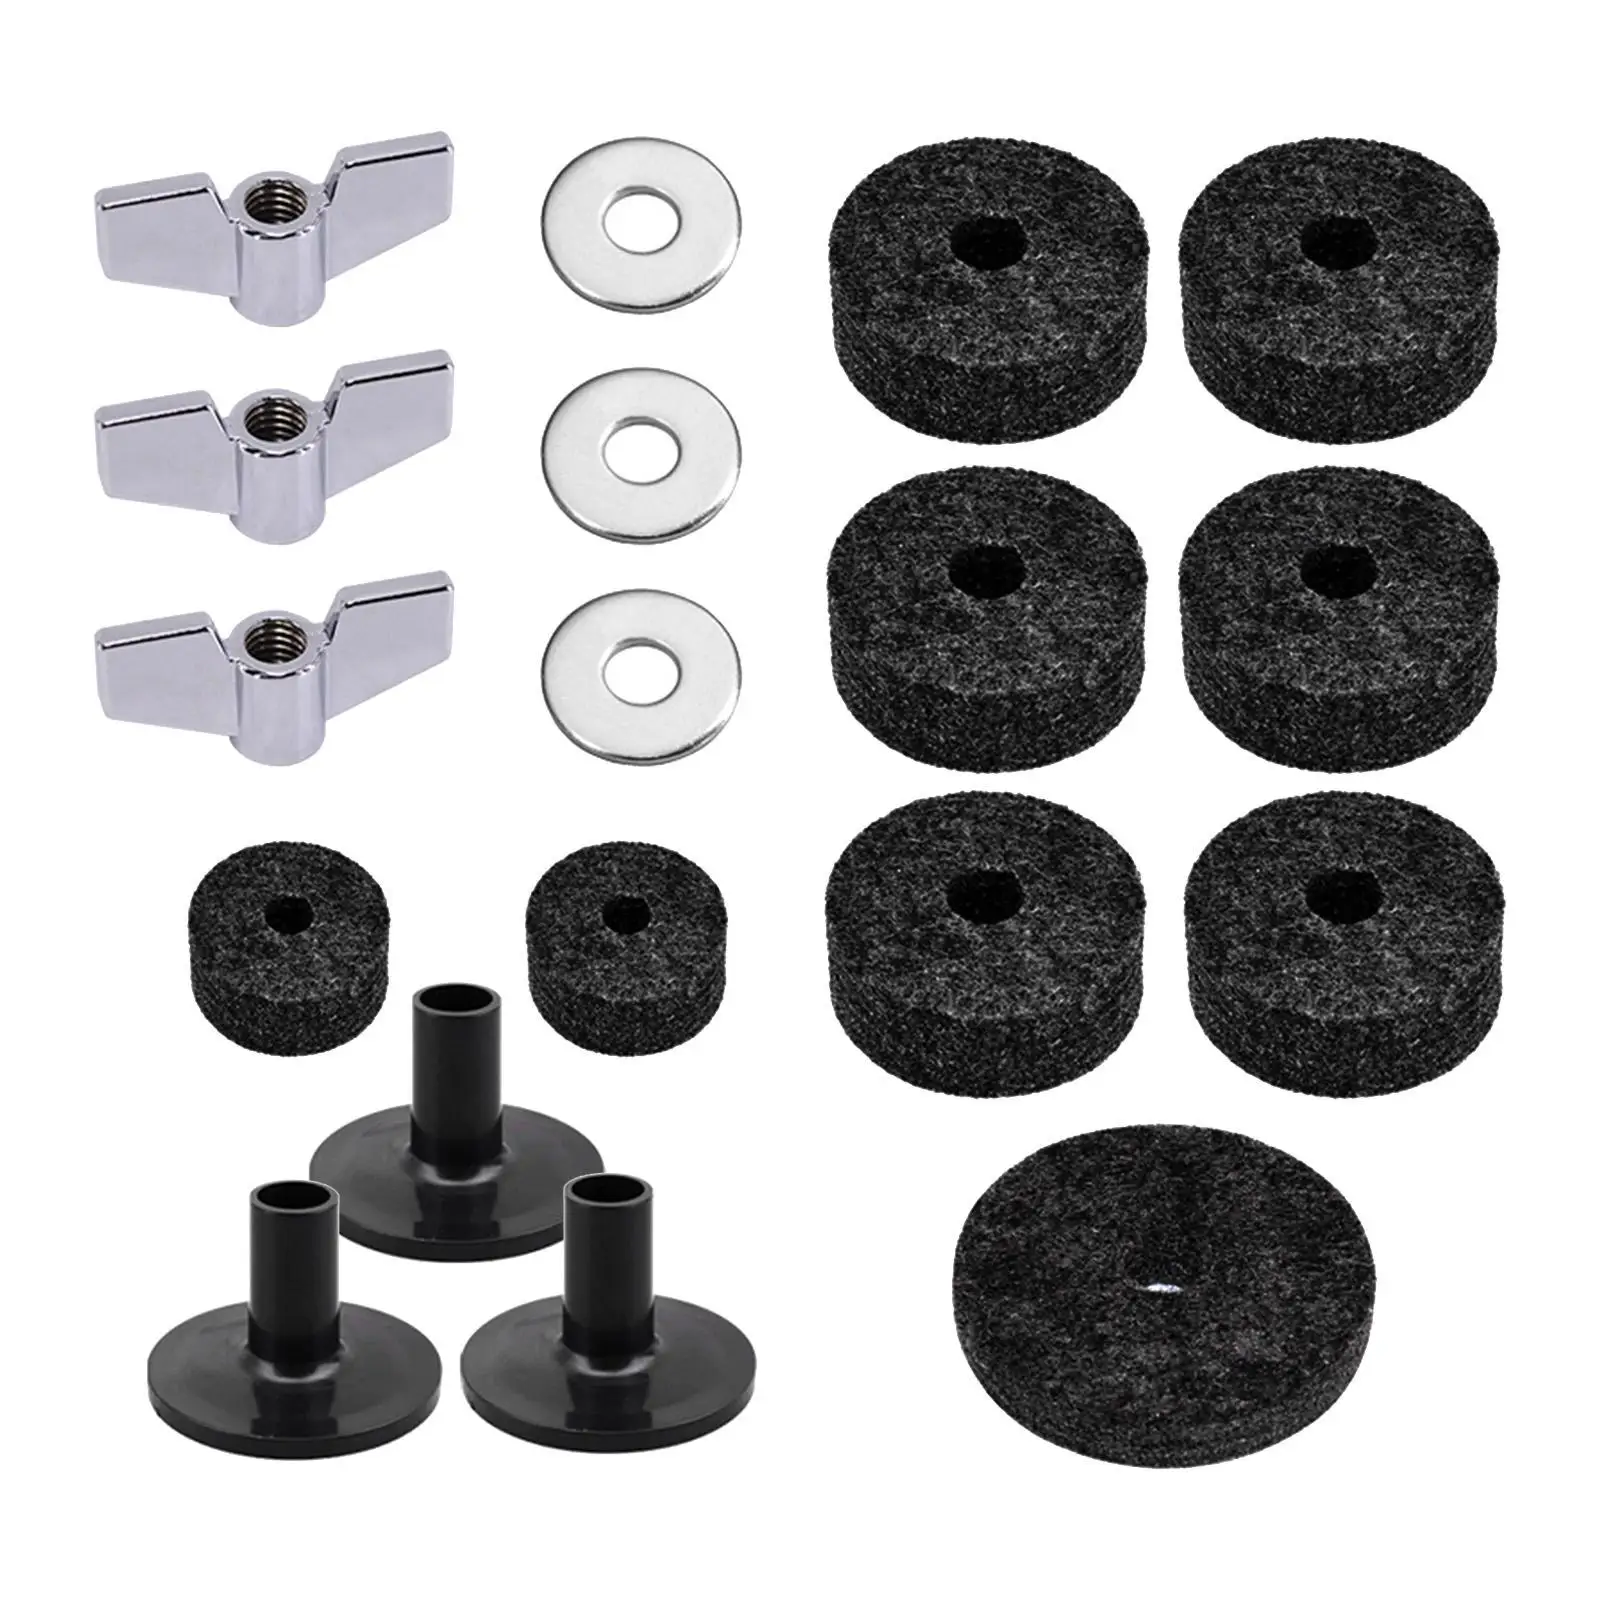 Drum Set Cymbal Felts Washers Replacement Accessories, Cymbal Washer, Drum Replacement Parts, for Performance Music Stage